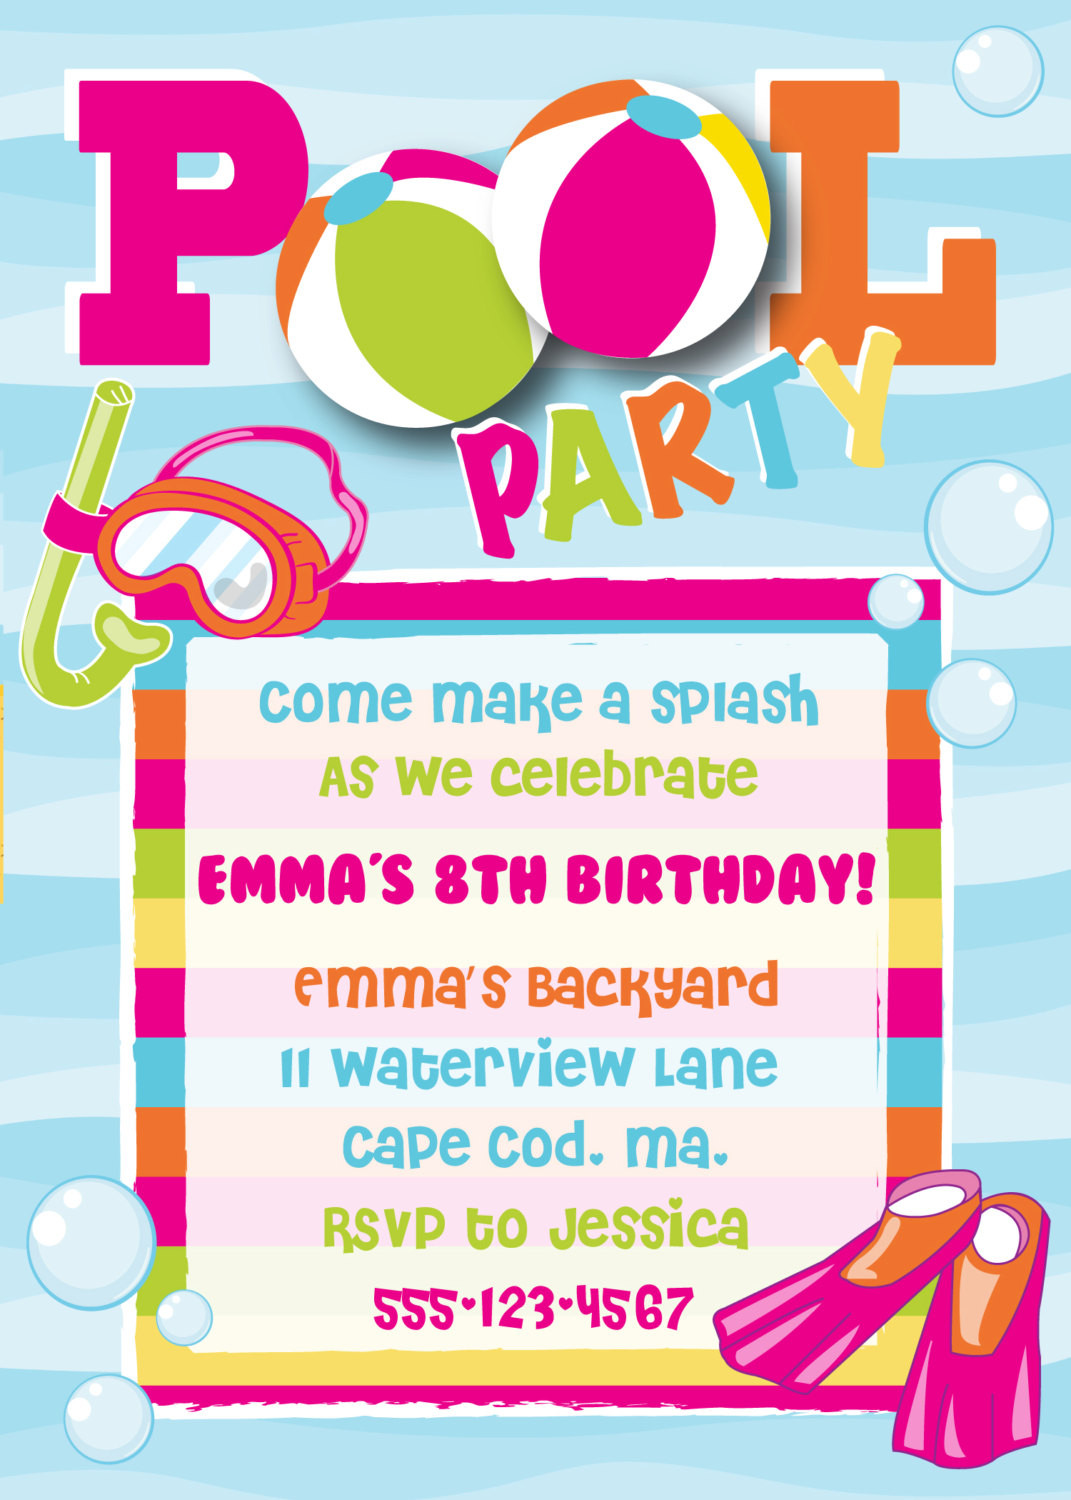 Pool Party Birthday Invitations
 Pool Party Birthday Invitation Girl by AnchorBlueDesign on